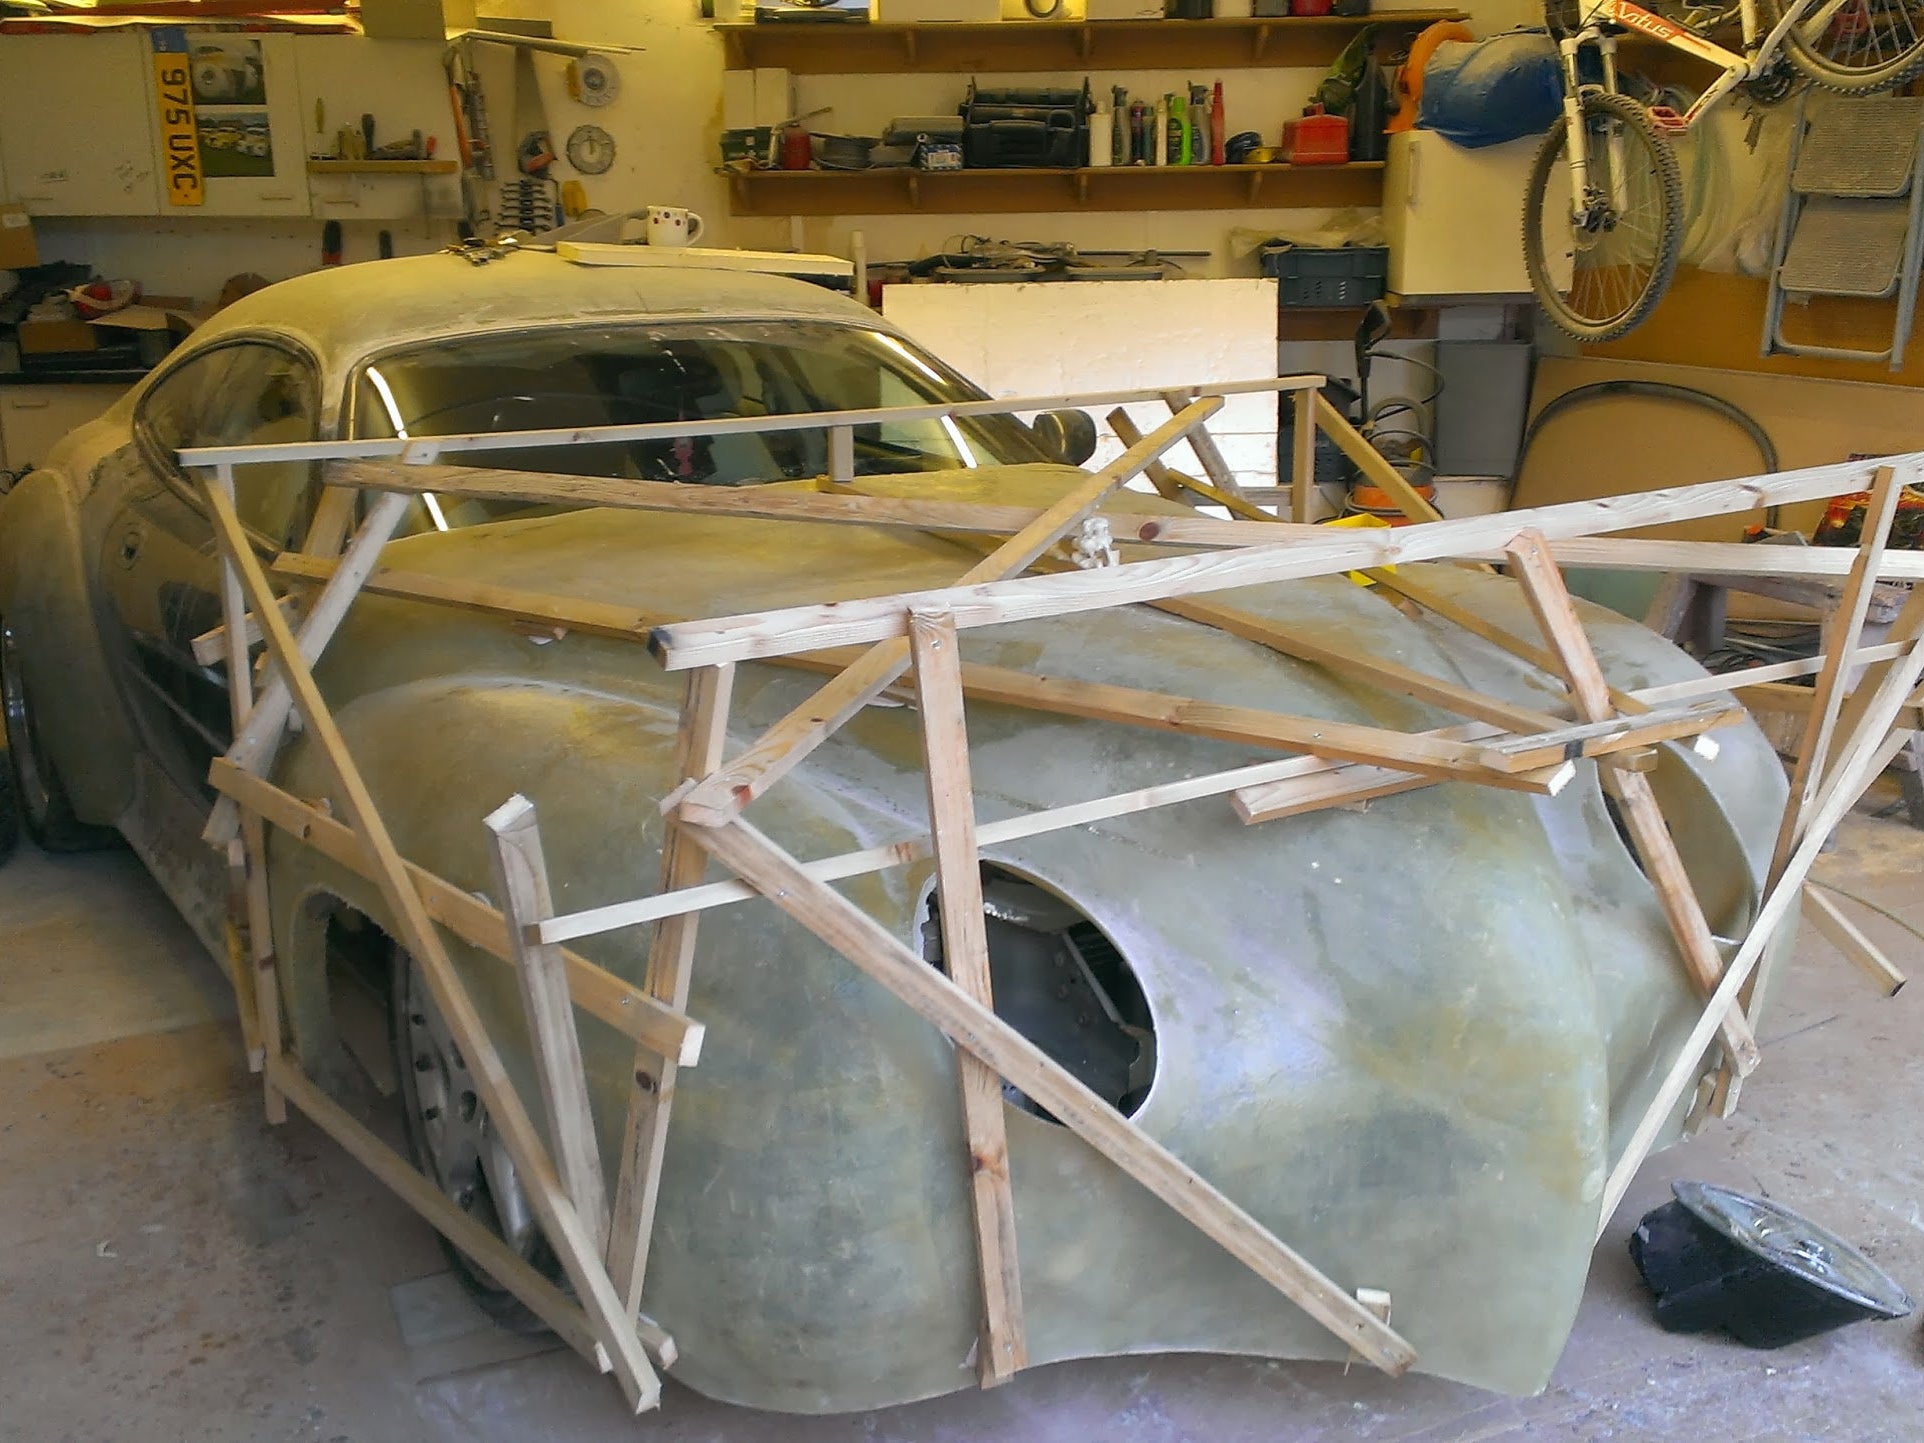 Graham Slater enlisted a friend to help him measure the car’s shape using string lines and create a cardboard template